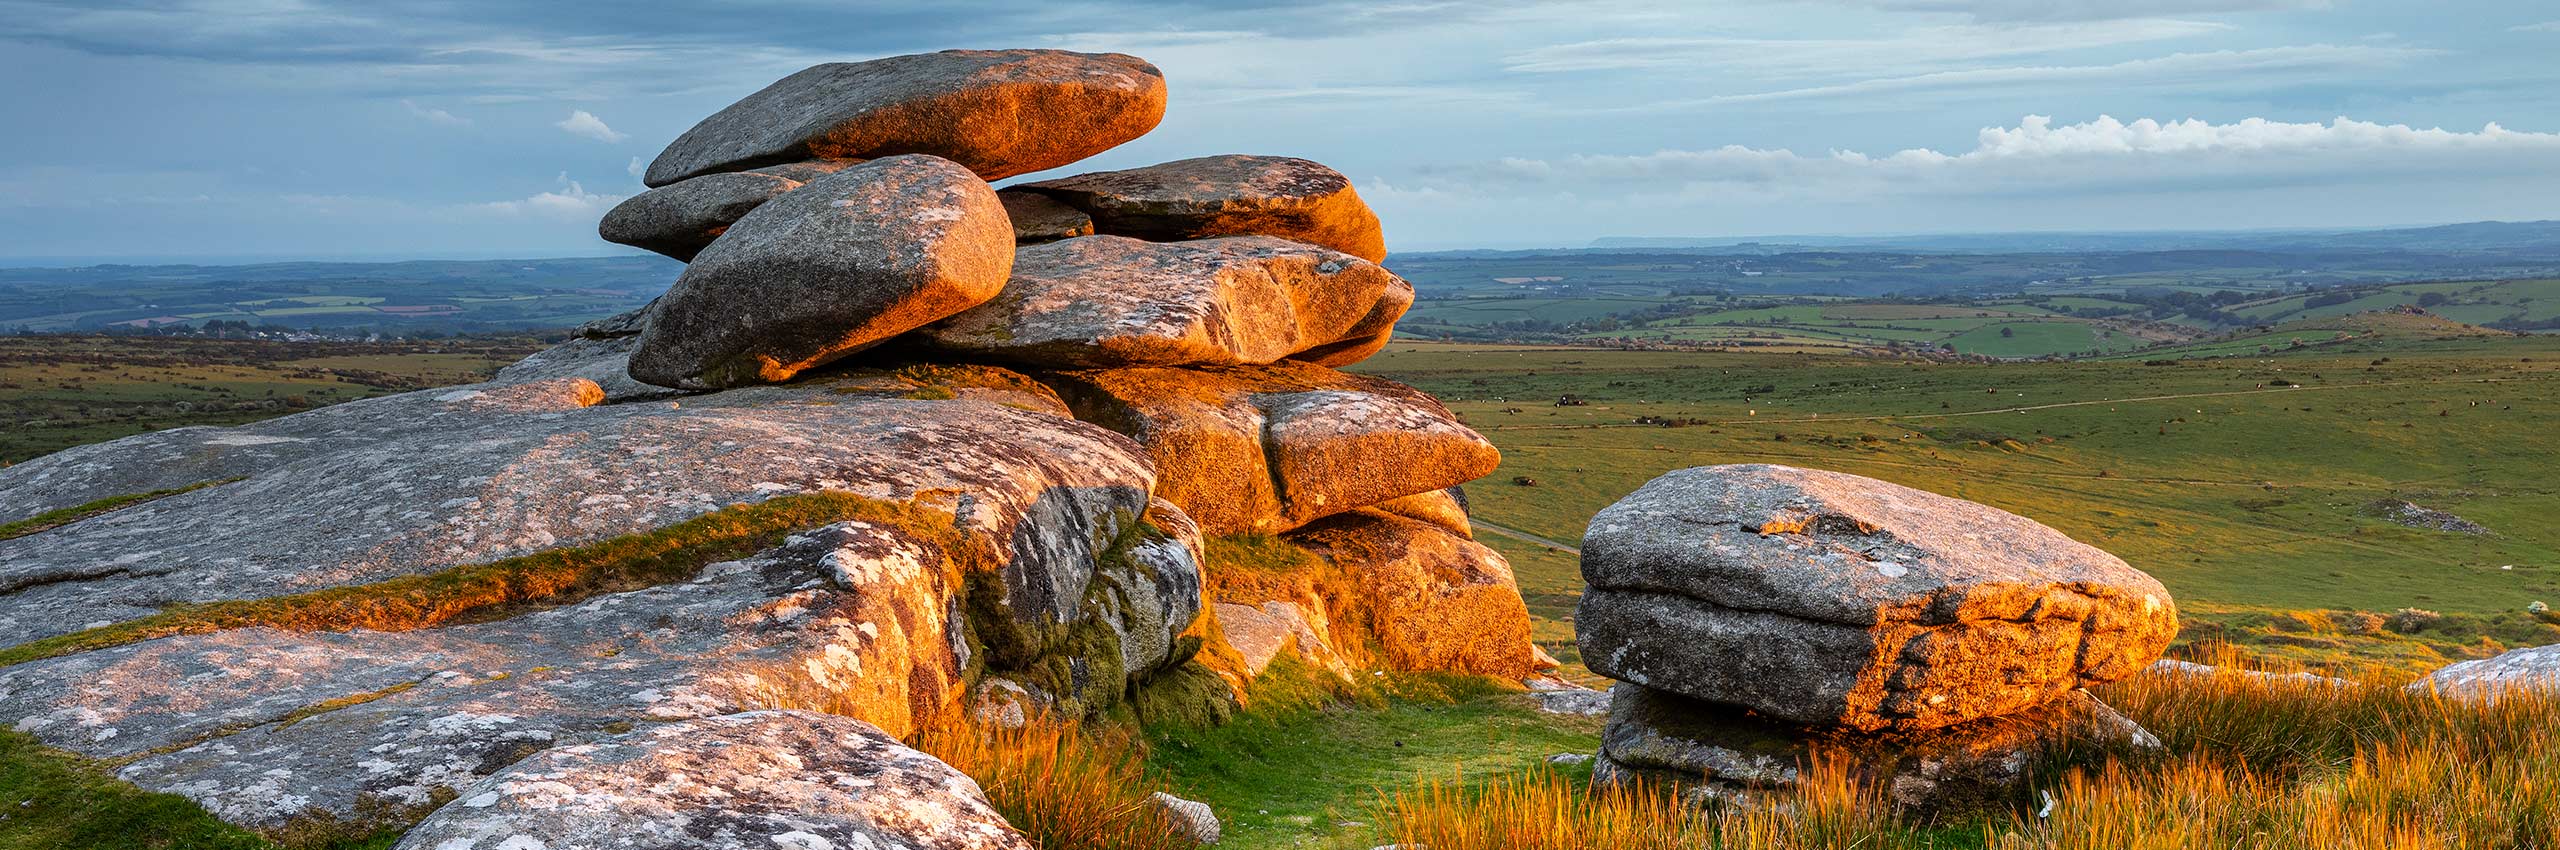 BVH-20648219 | UK/Cornwall, Group of Rocks called The Cheesewring near Minions | © Reinhard Schmid/4Corners